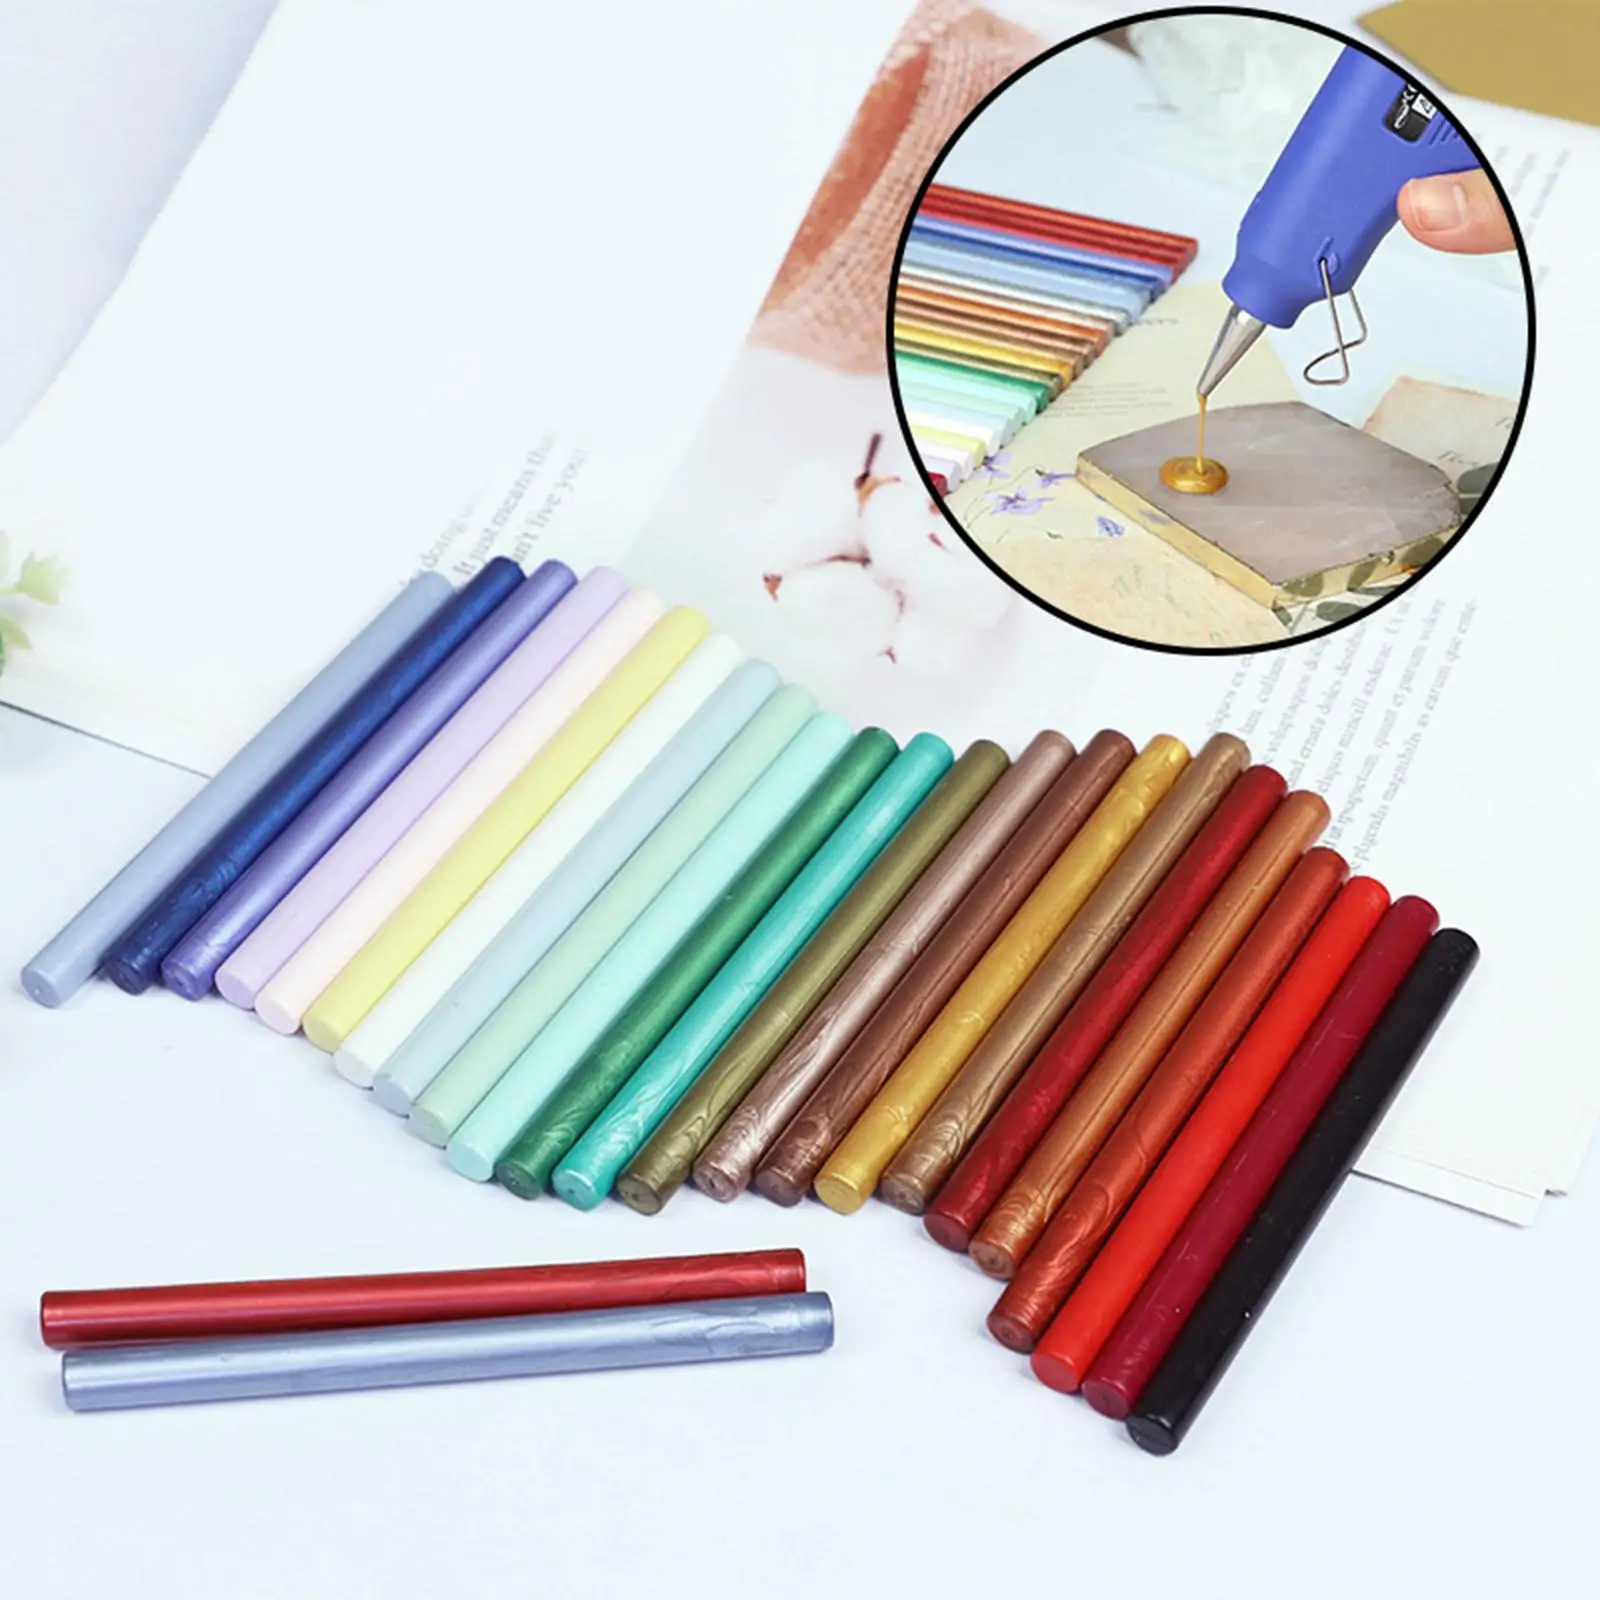 25x Sealing  Rods DIY Project Melting Mixed Colors sealing  Rods for Wedding, ,  Stamp, Wedding Invitations, Packages